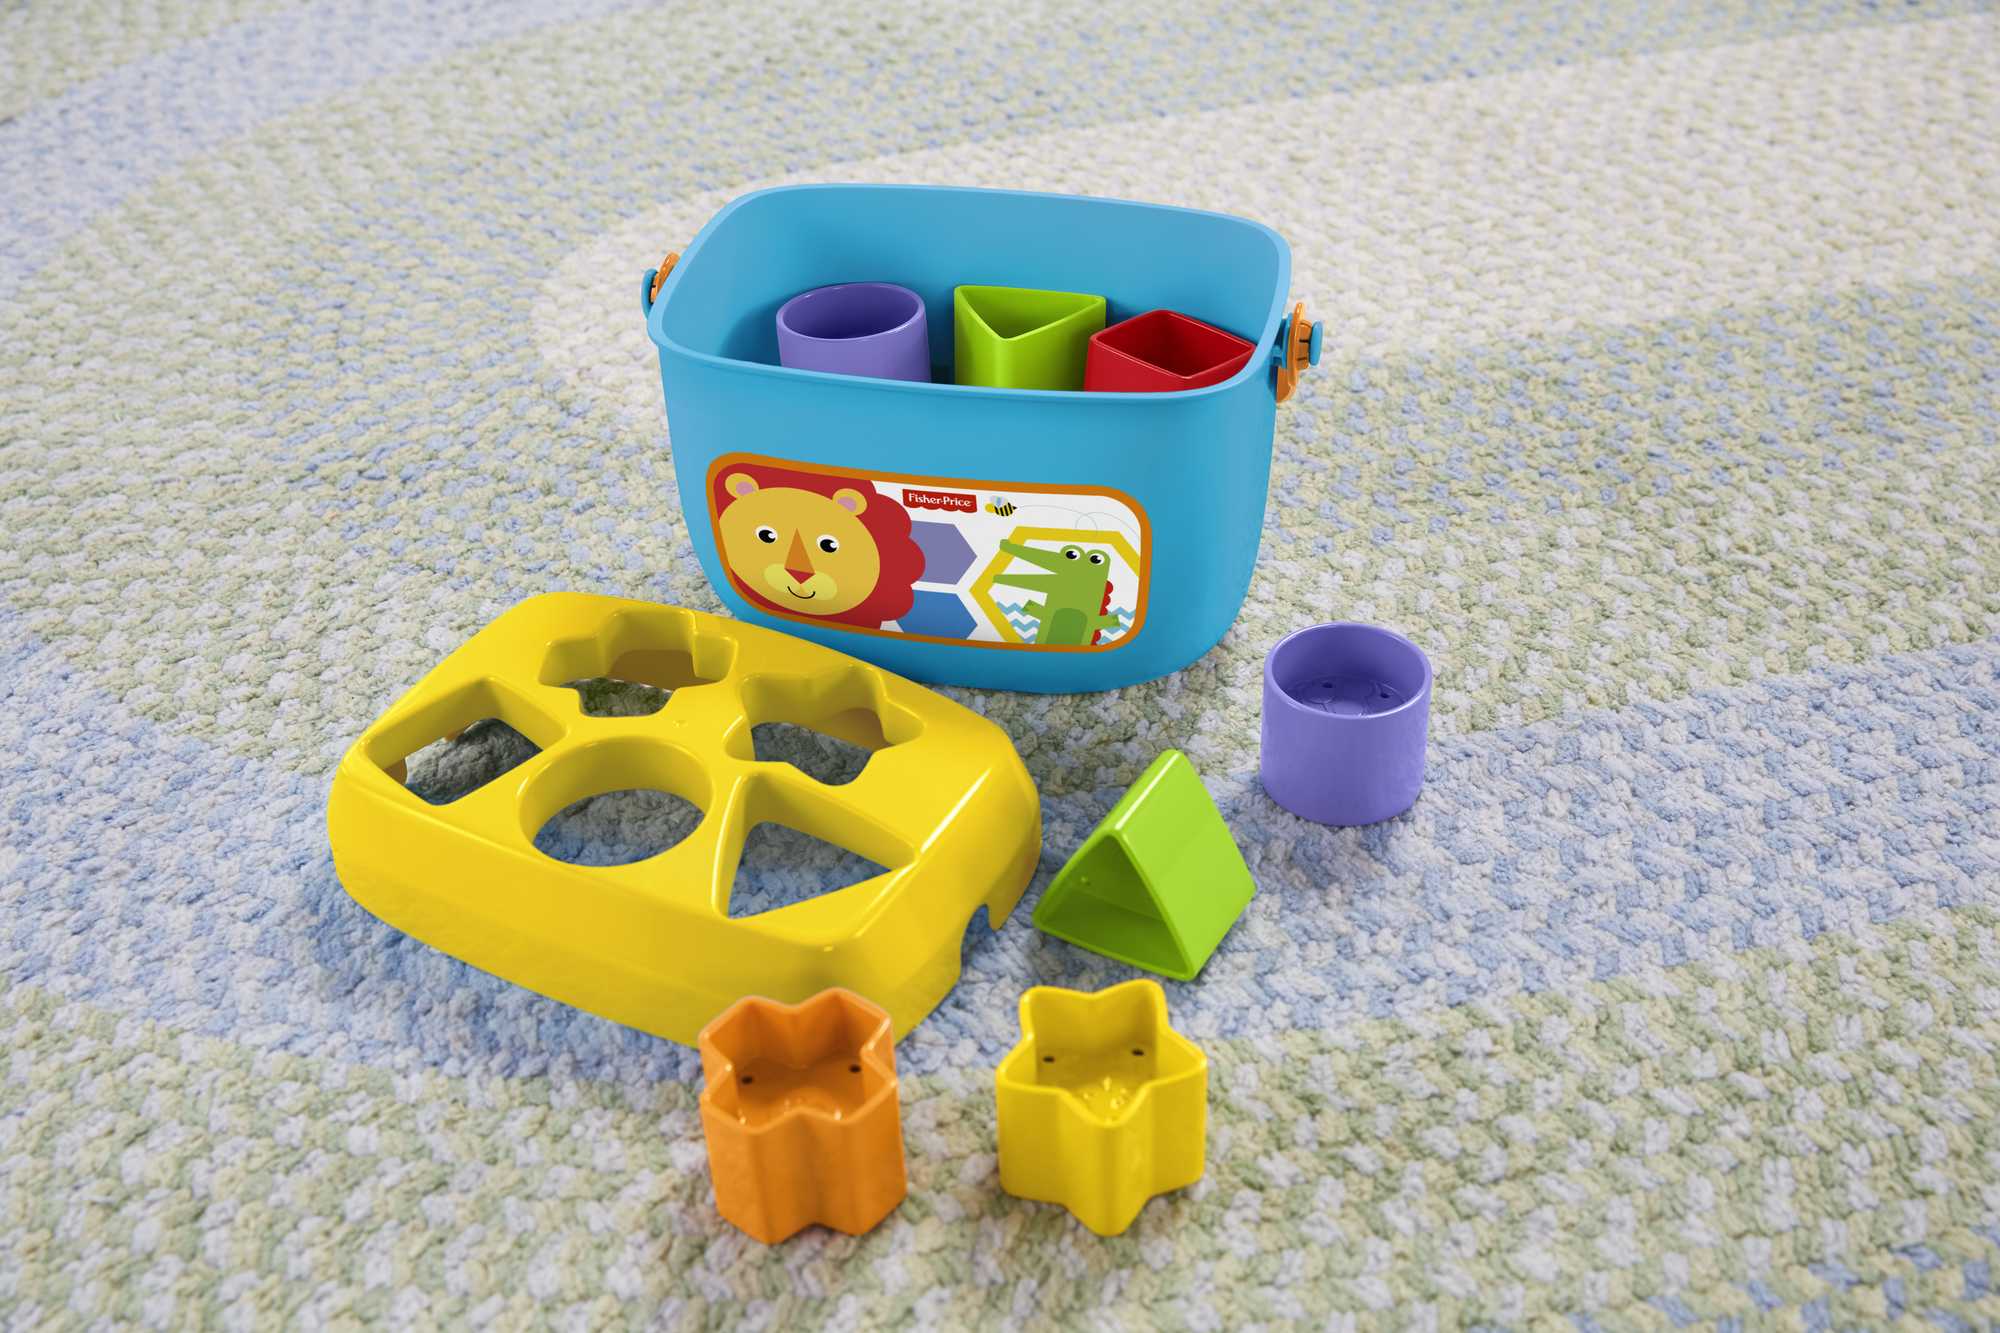 Fisher-Price Baby’s First Blocks Shape Sorting Toy with Storage Bucket, 12 Pieces - image 5 of 7